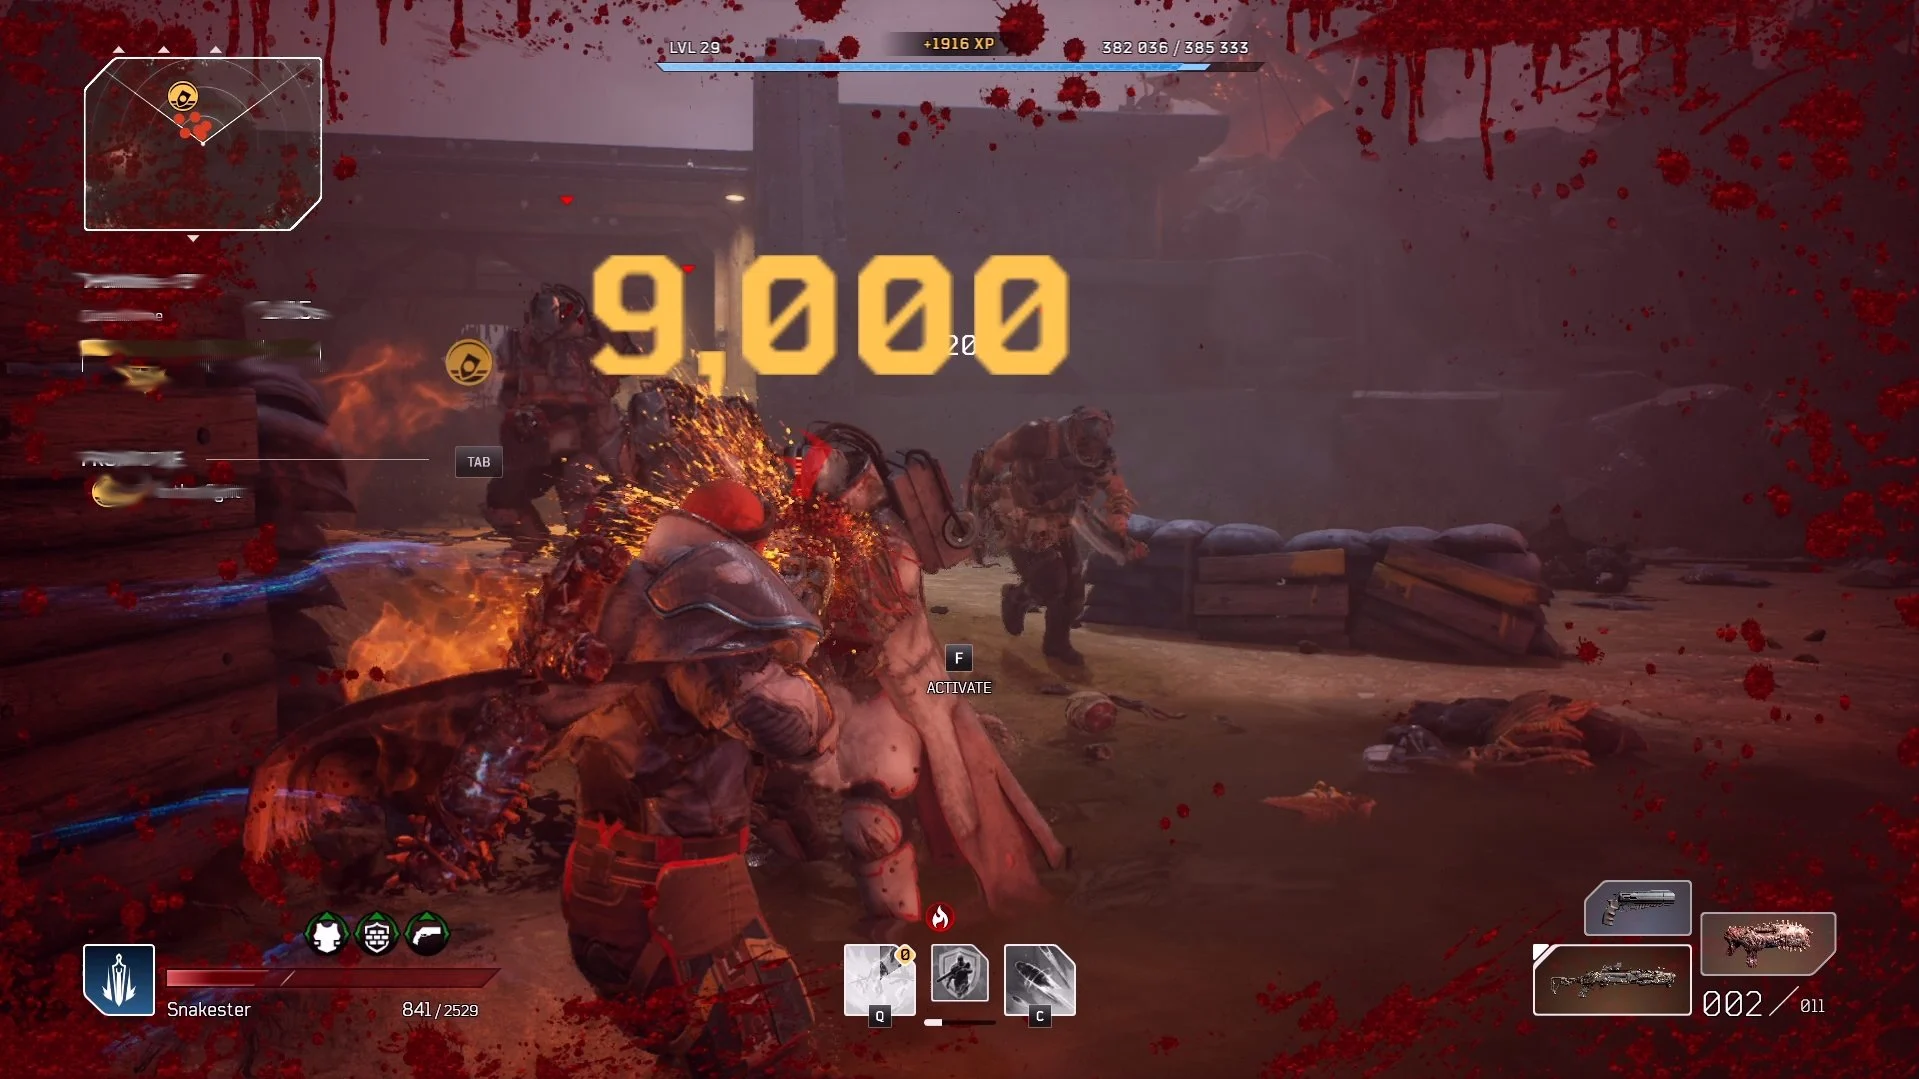 Outriders - High Damage Number Screenshot